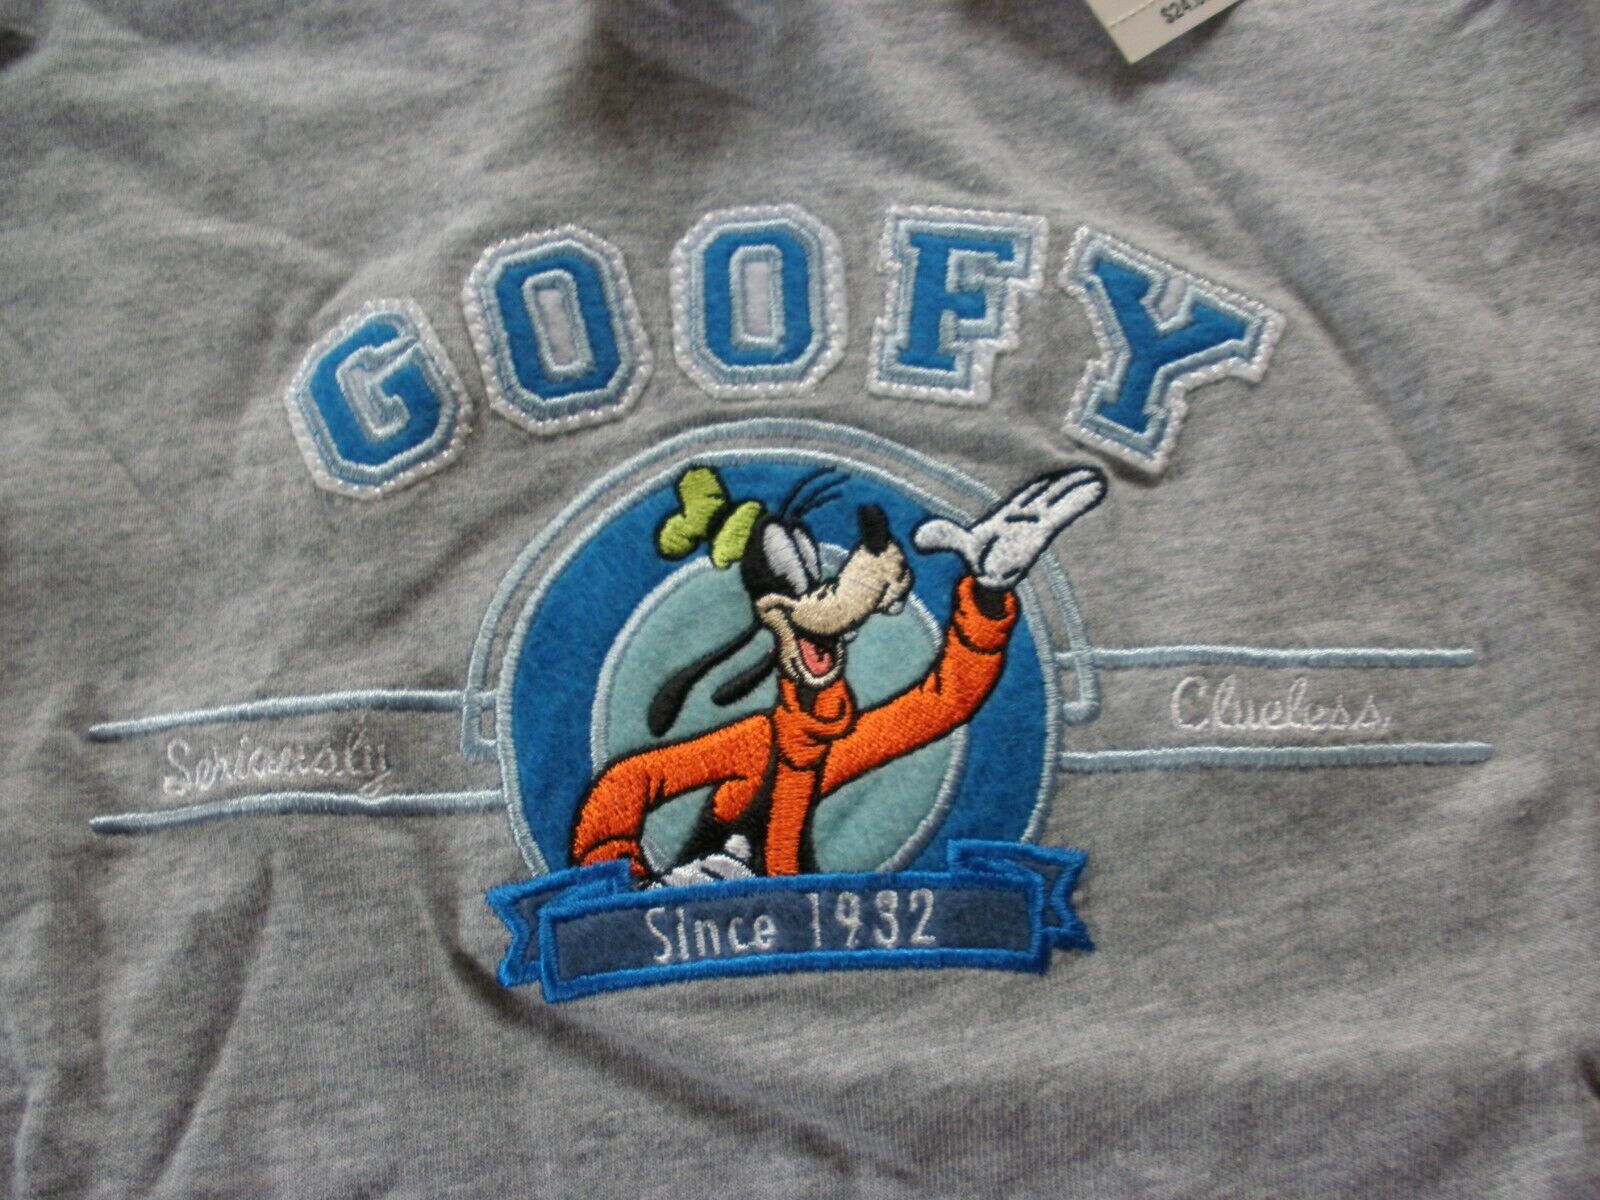 Goofy 1932 Seriously Clueless Disneyland Kids S Disney NWT 2000s embroidered